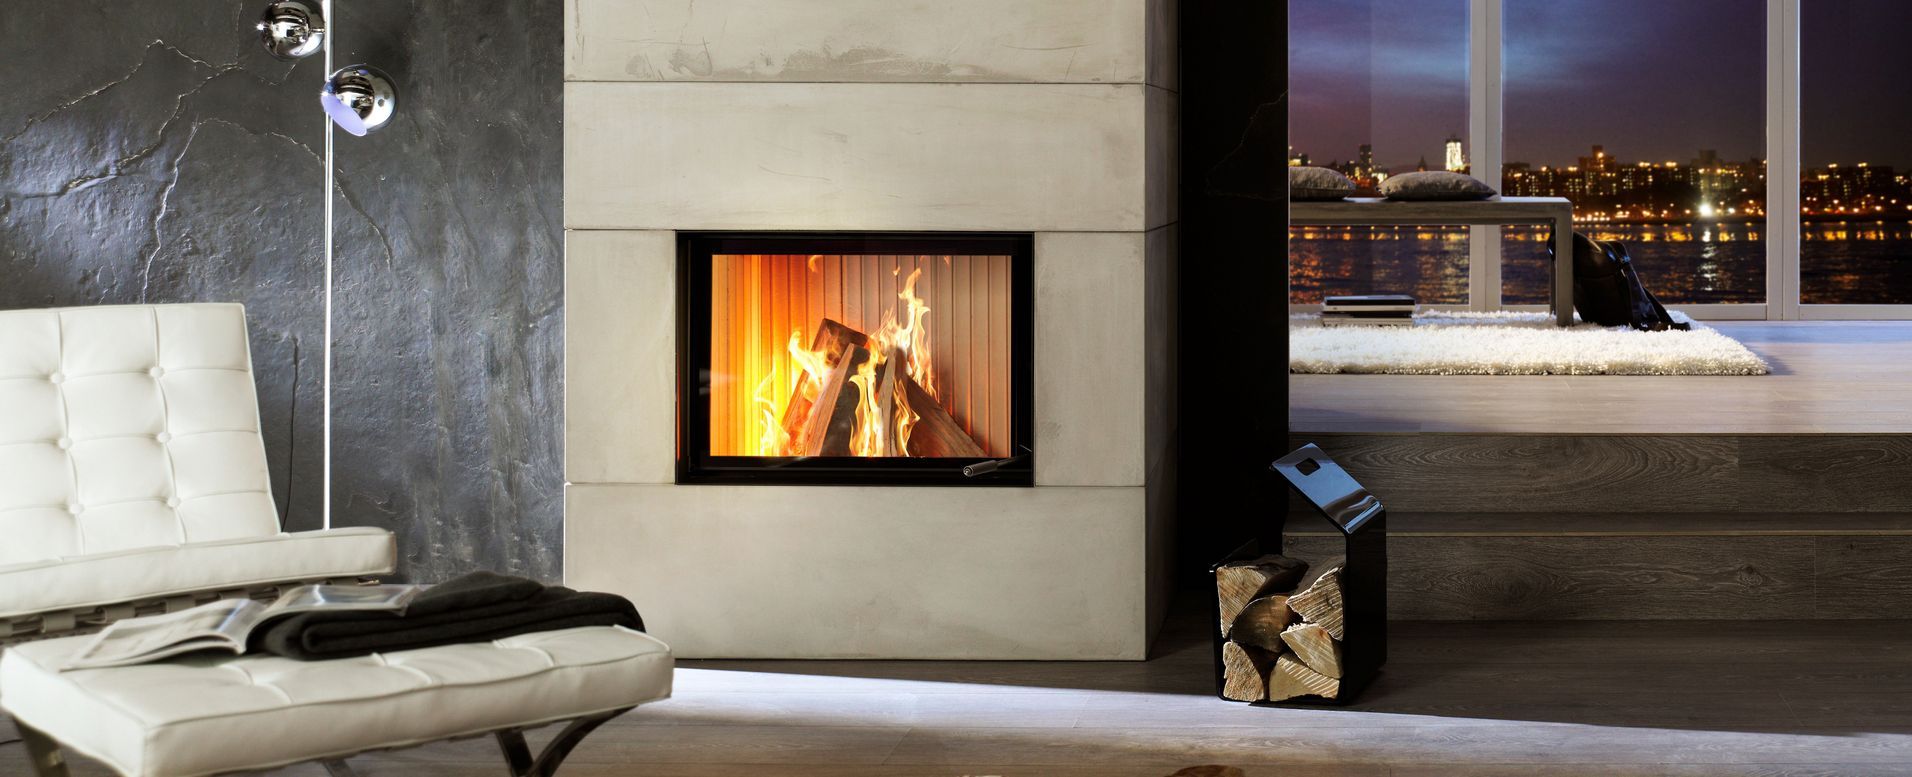 Euro Fireplaces Banner image